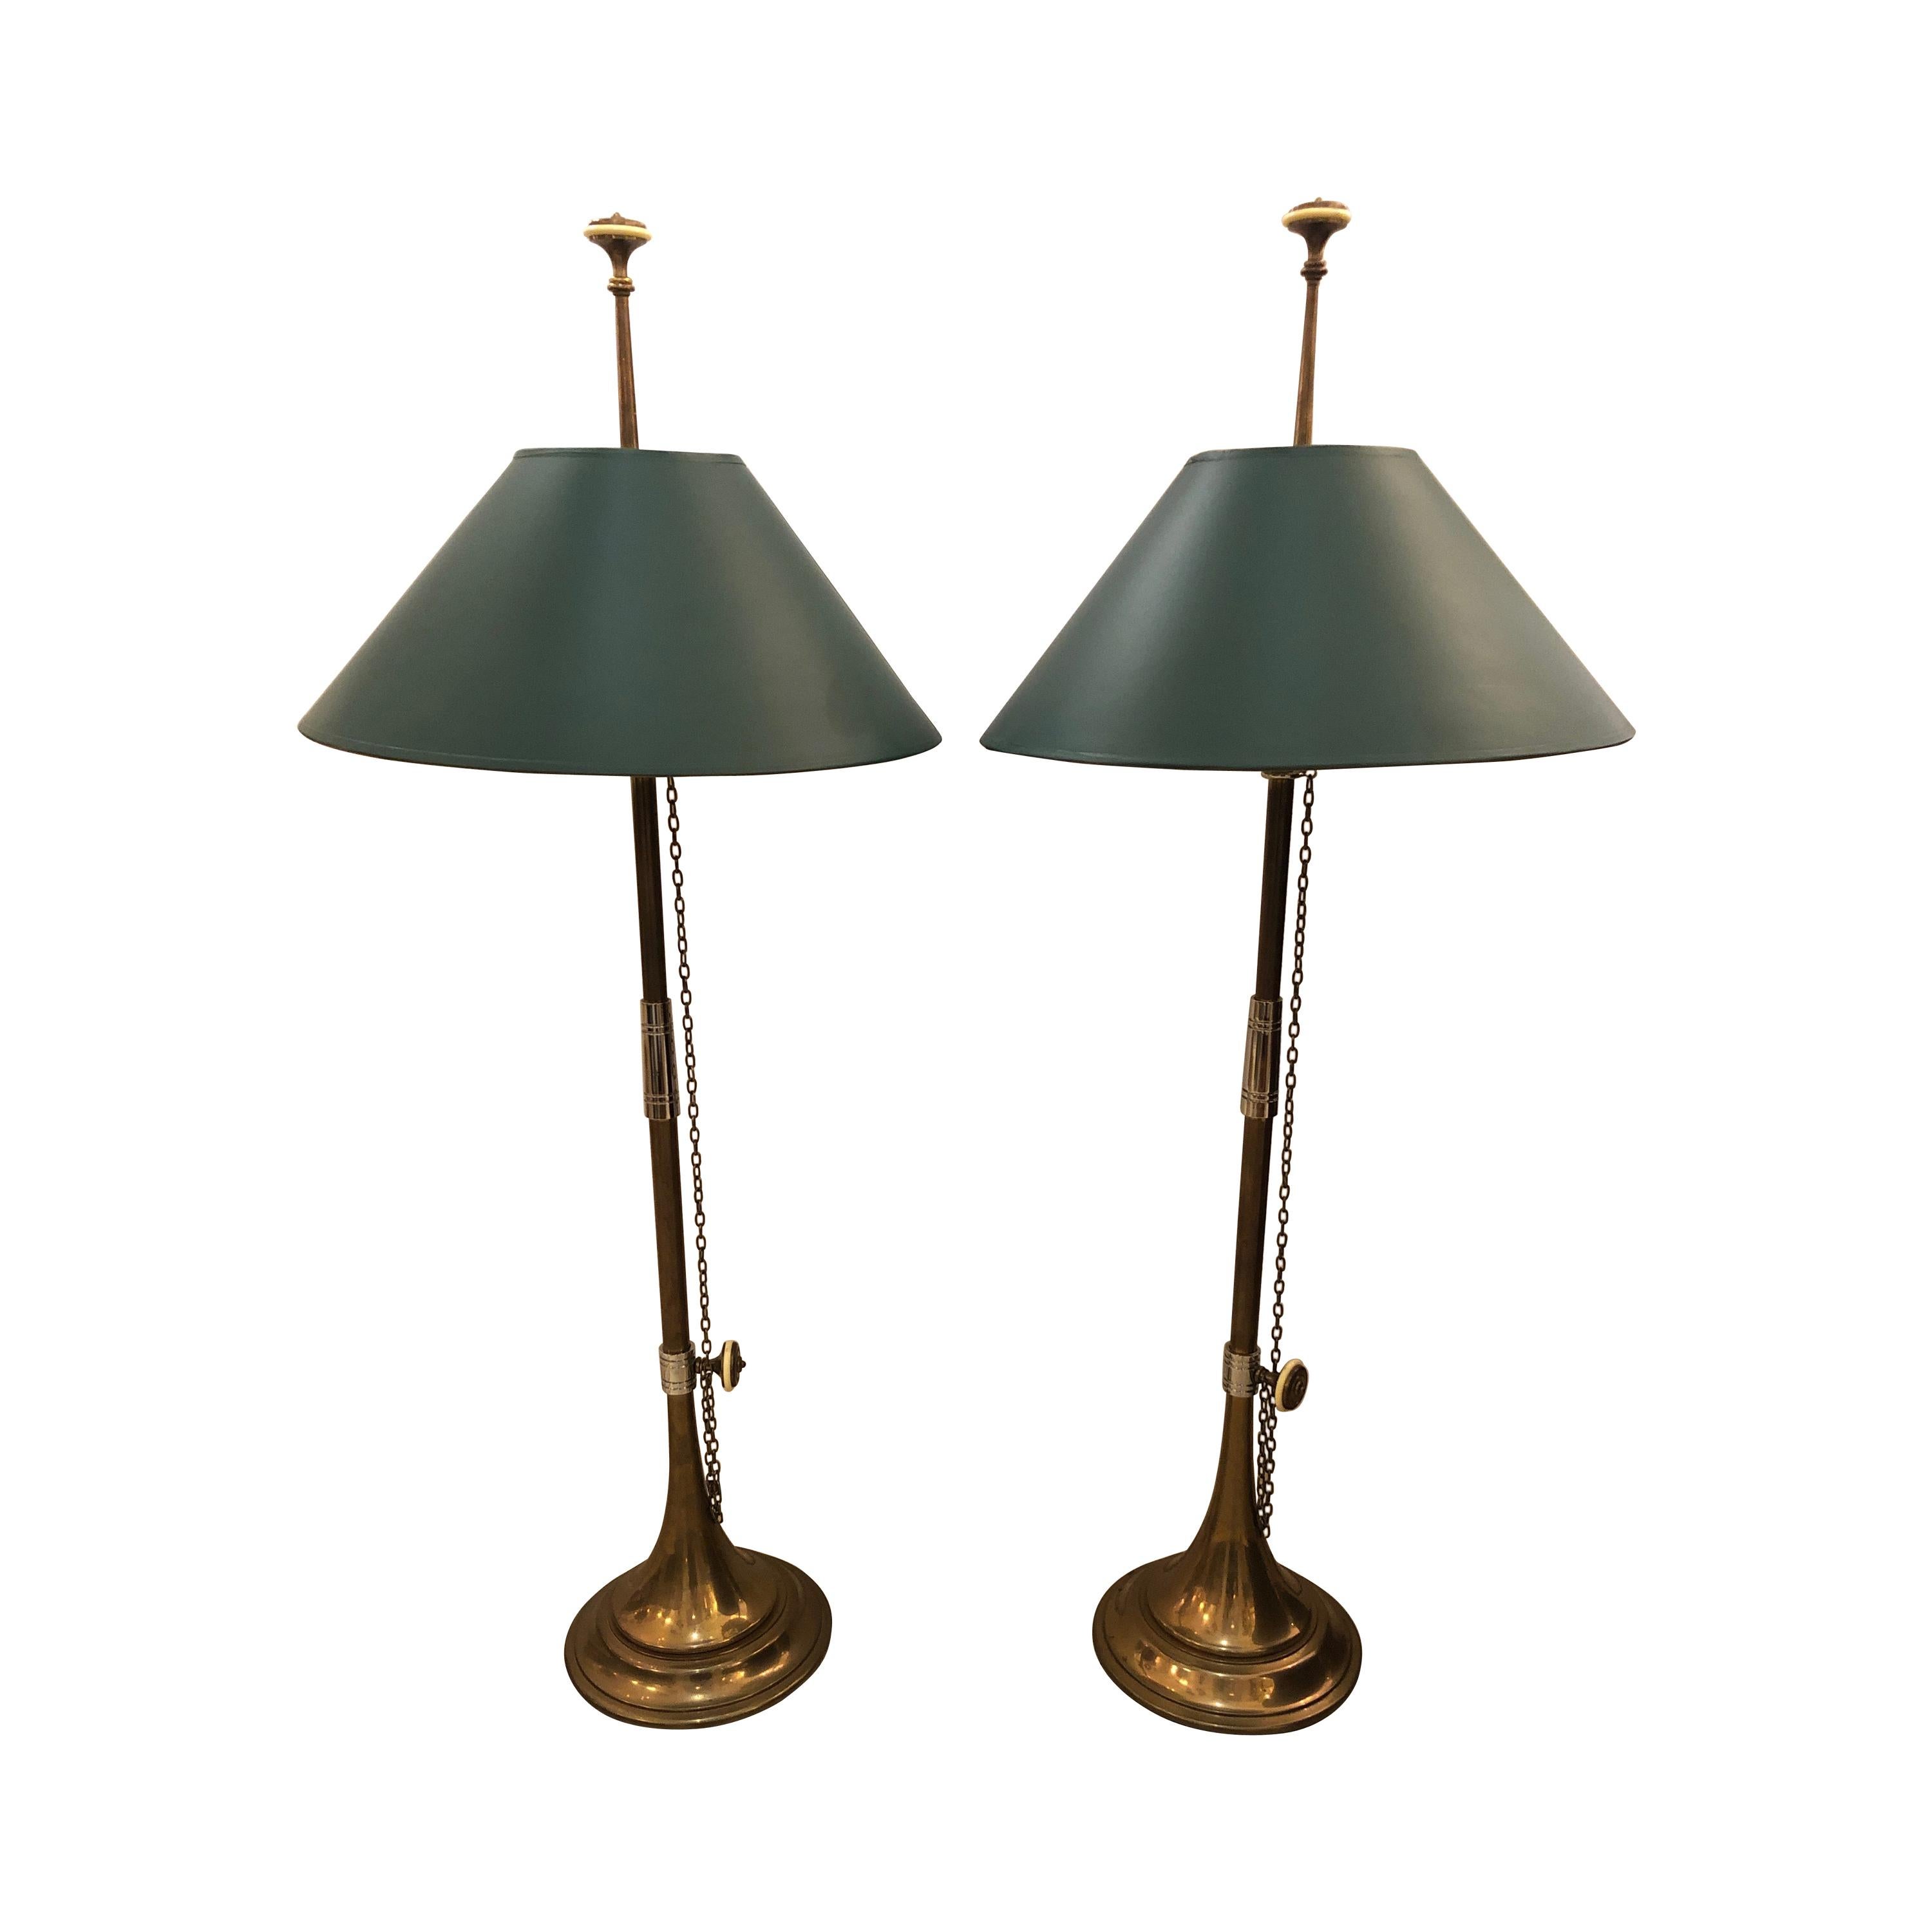 Pair of Tall Horn Motife Brass Table Lamps by Chapman